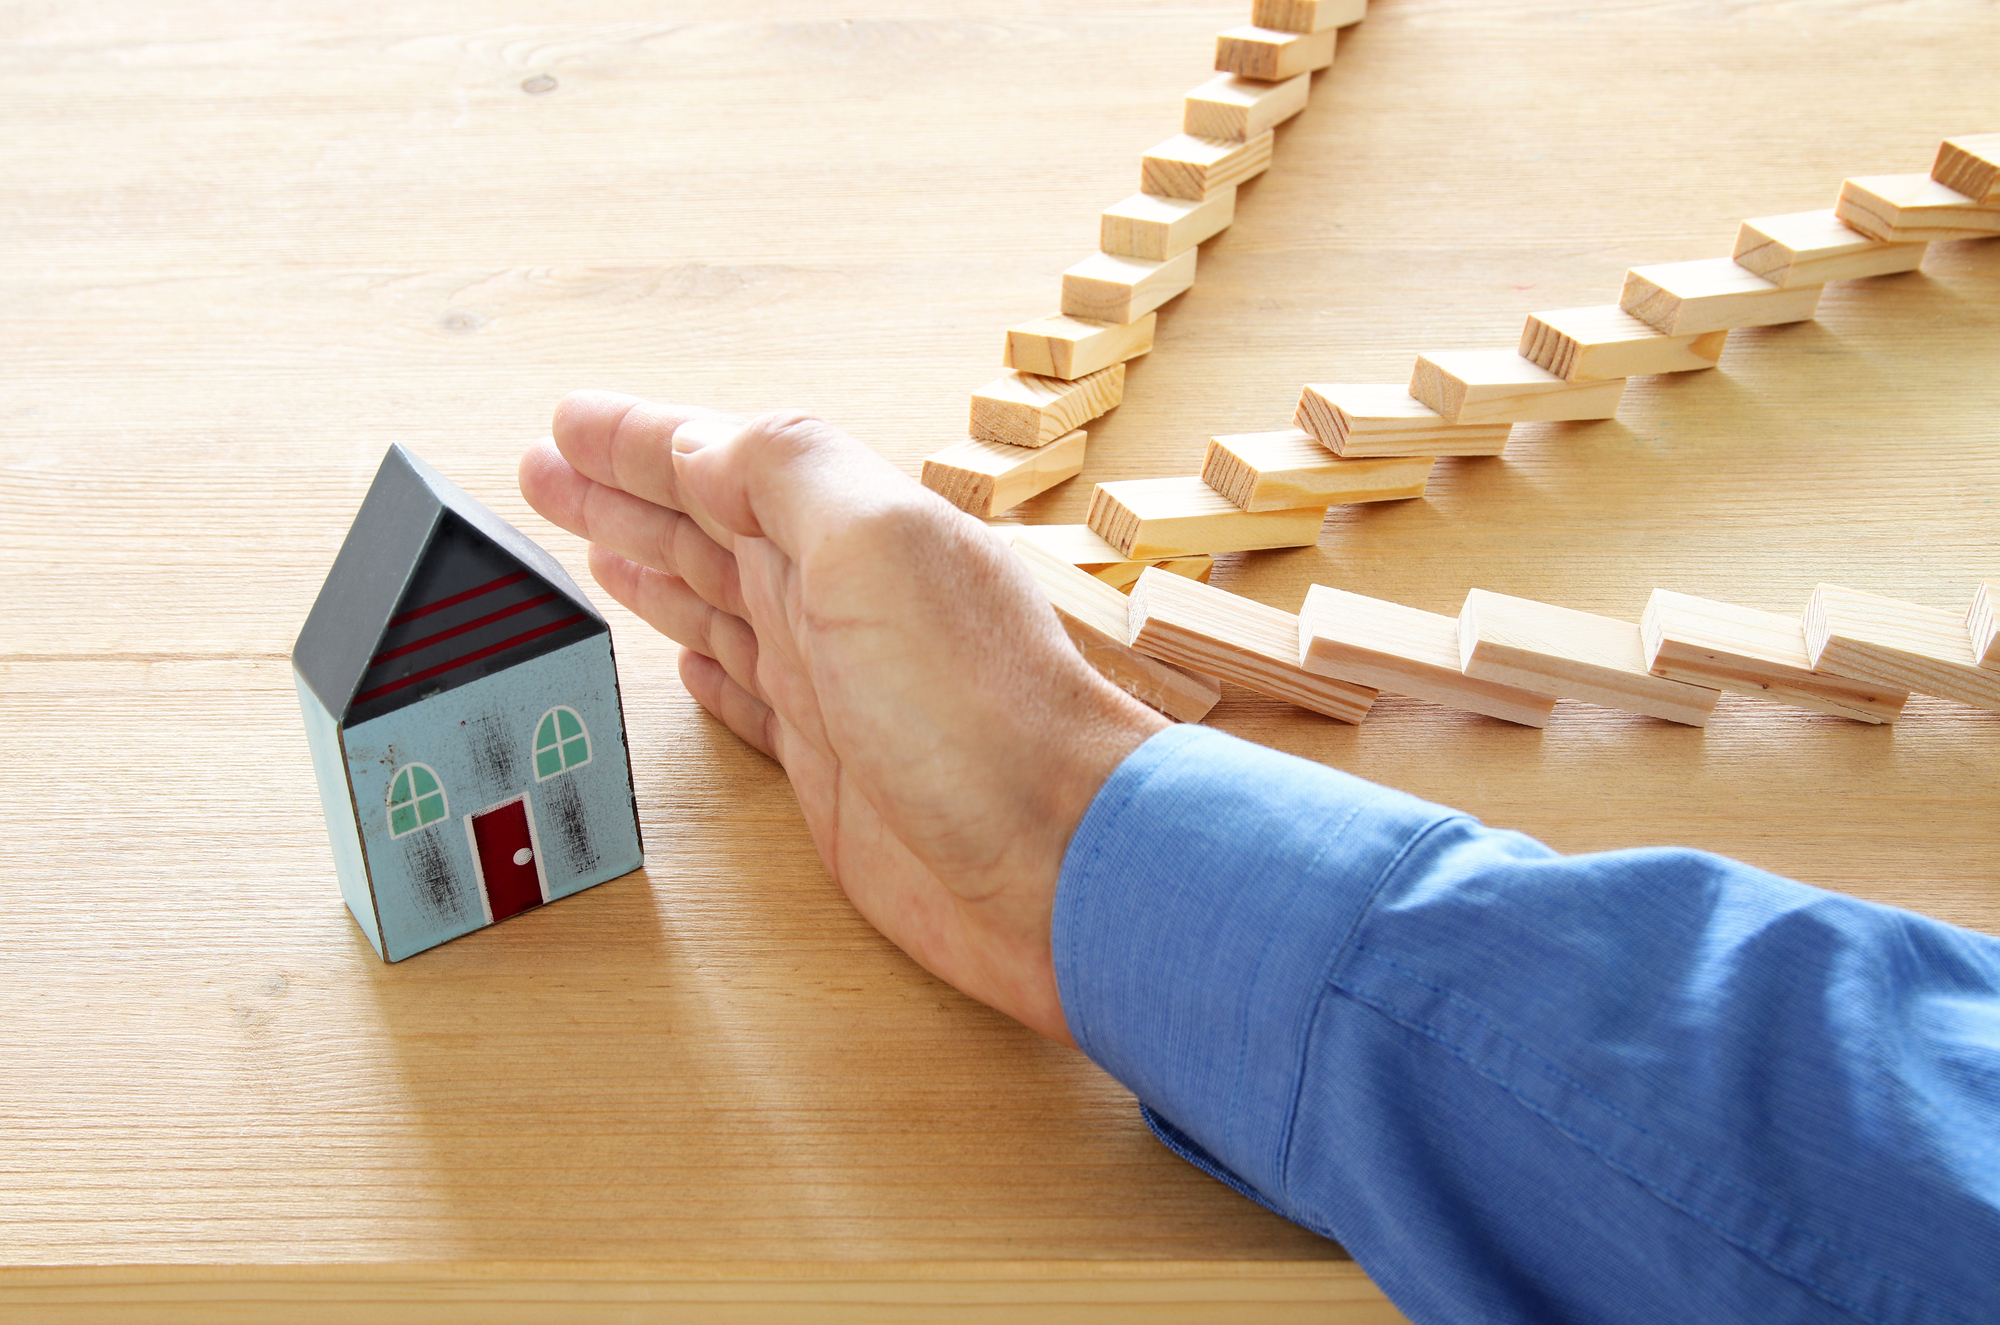 concept image of real estate insurance and protection. man hands blocking the domino effect, saving a small house.